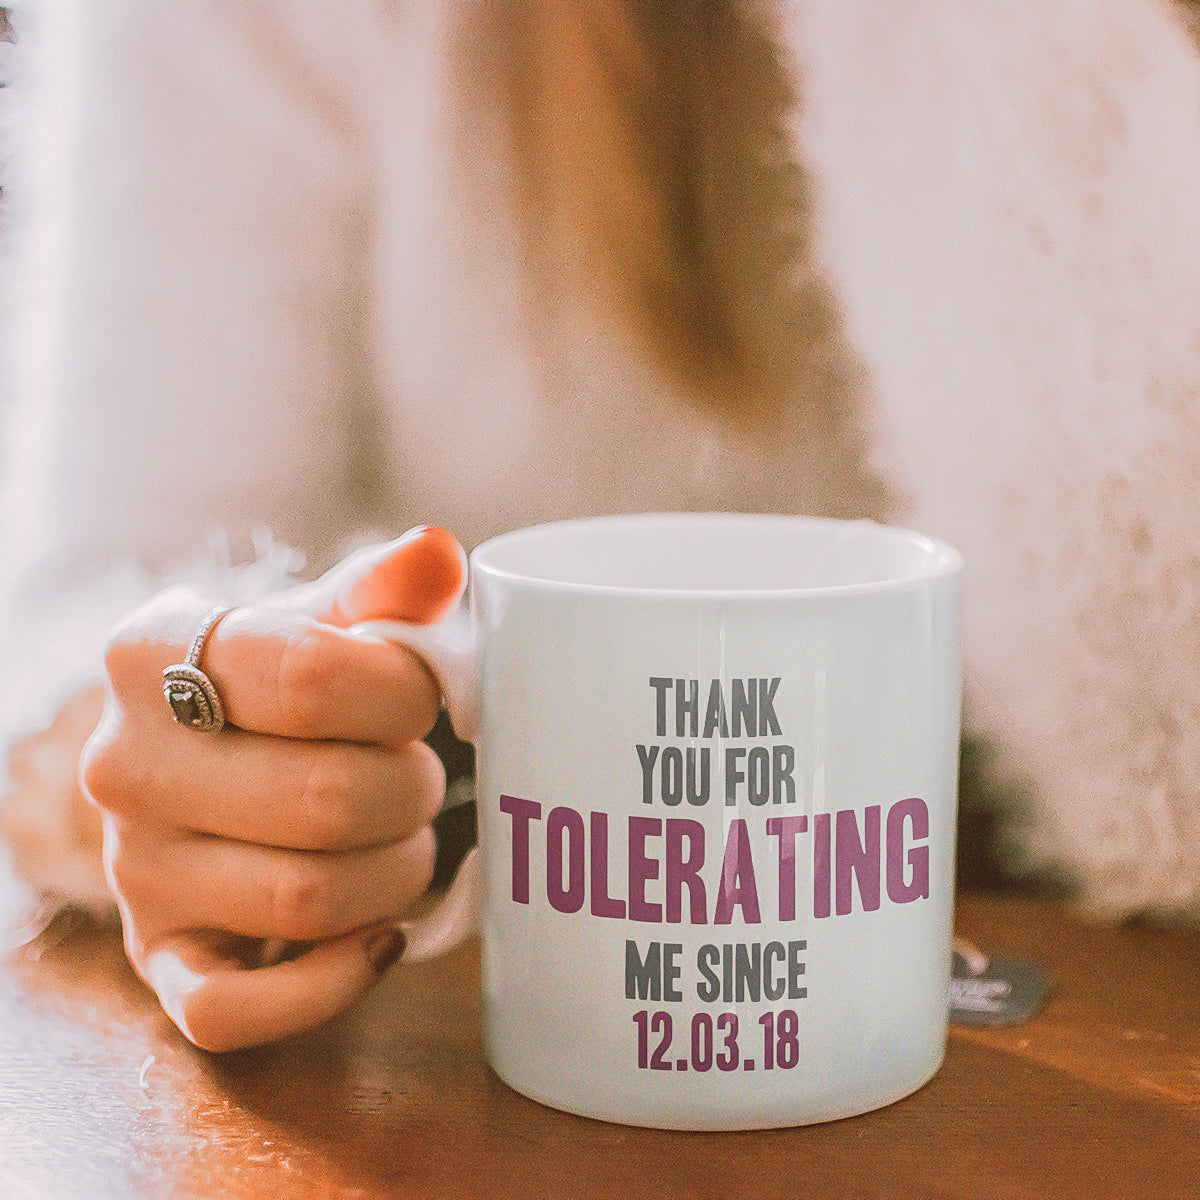  Personalised 'Thank You For Tolerating Me' Mug Personalised 'Thank You For Tolerating Me' Mug Personalised 'Thank You For Tolerating Me' Mug Personalised 'Thank You For Tolerating Me' Mug Personalised 'Thank You For Tolerating Me' Mug Personalised 'Thank You For Tolerating Me' Mug